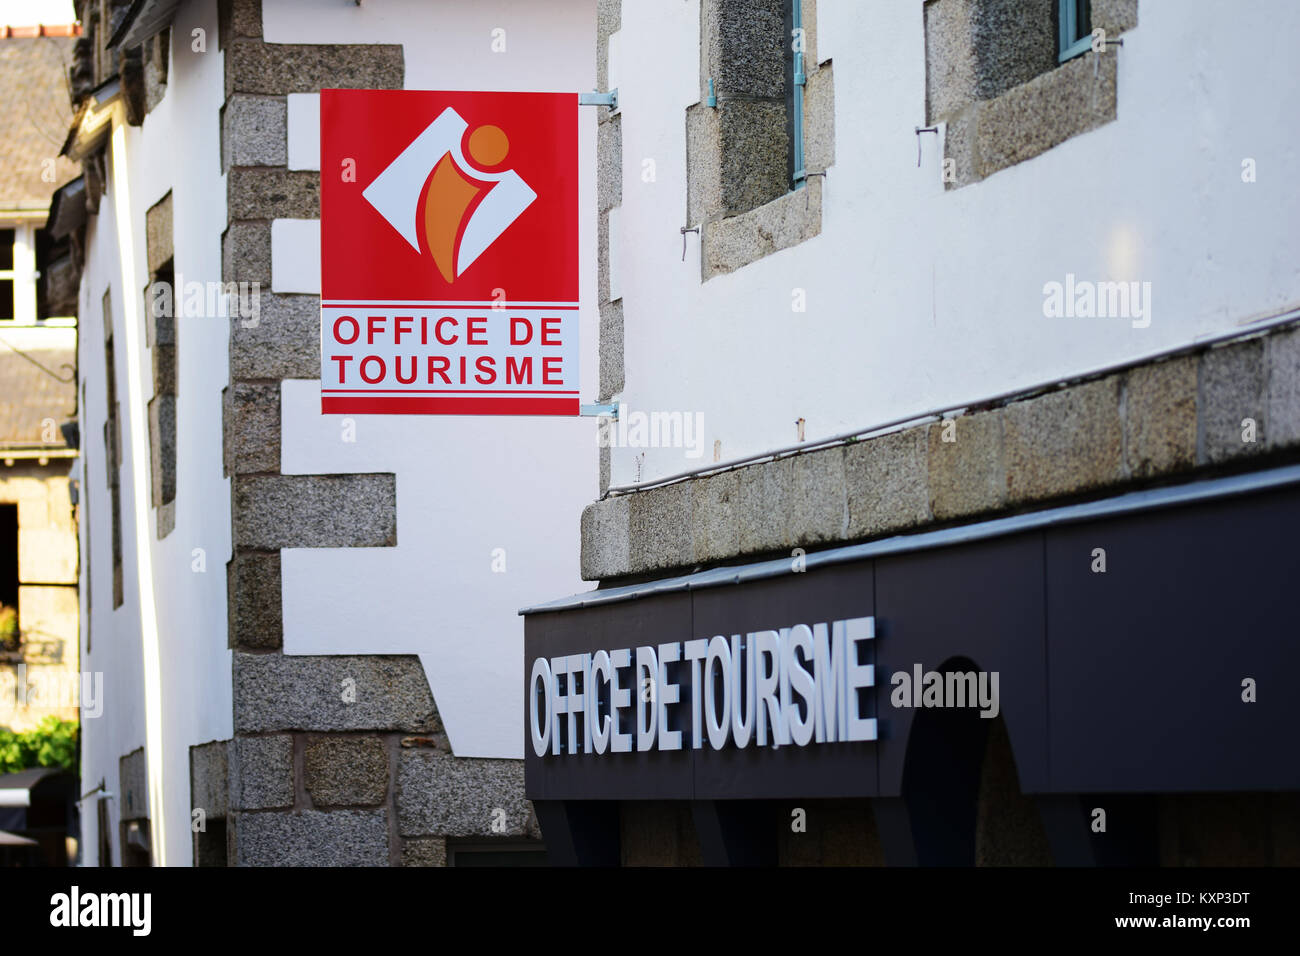 Office depot tourism in pont-aven, Brittany, france Stock Photo - Alamy